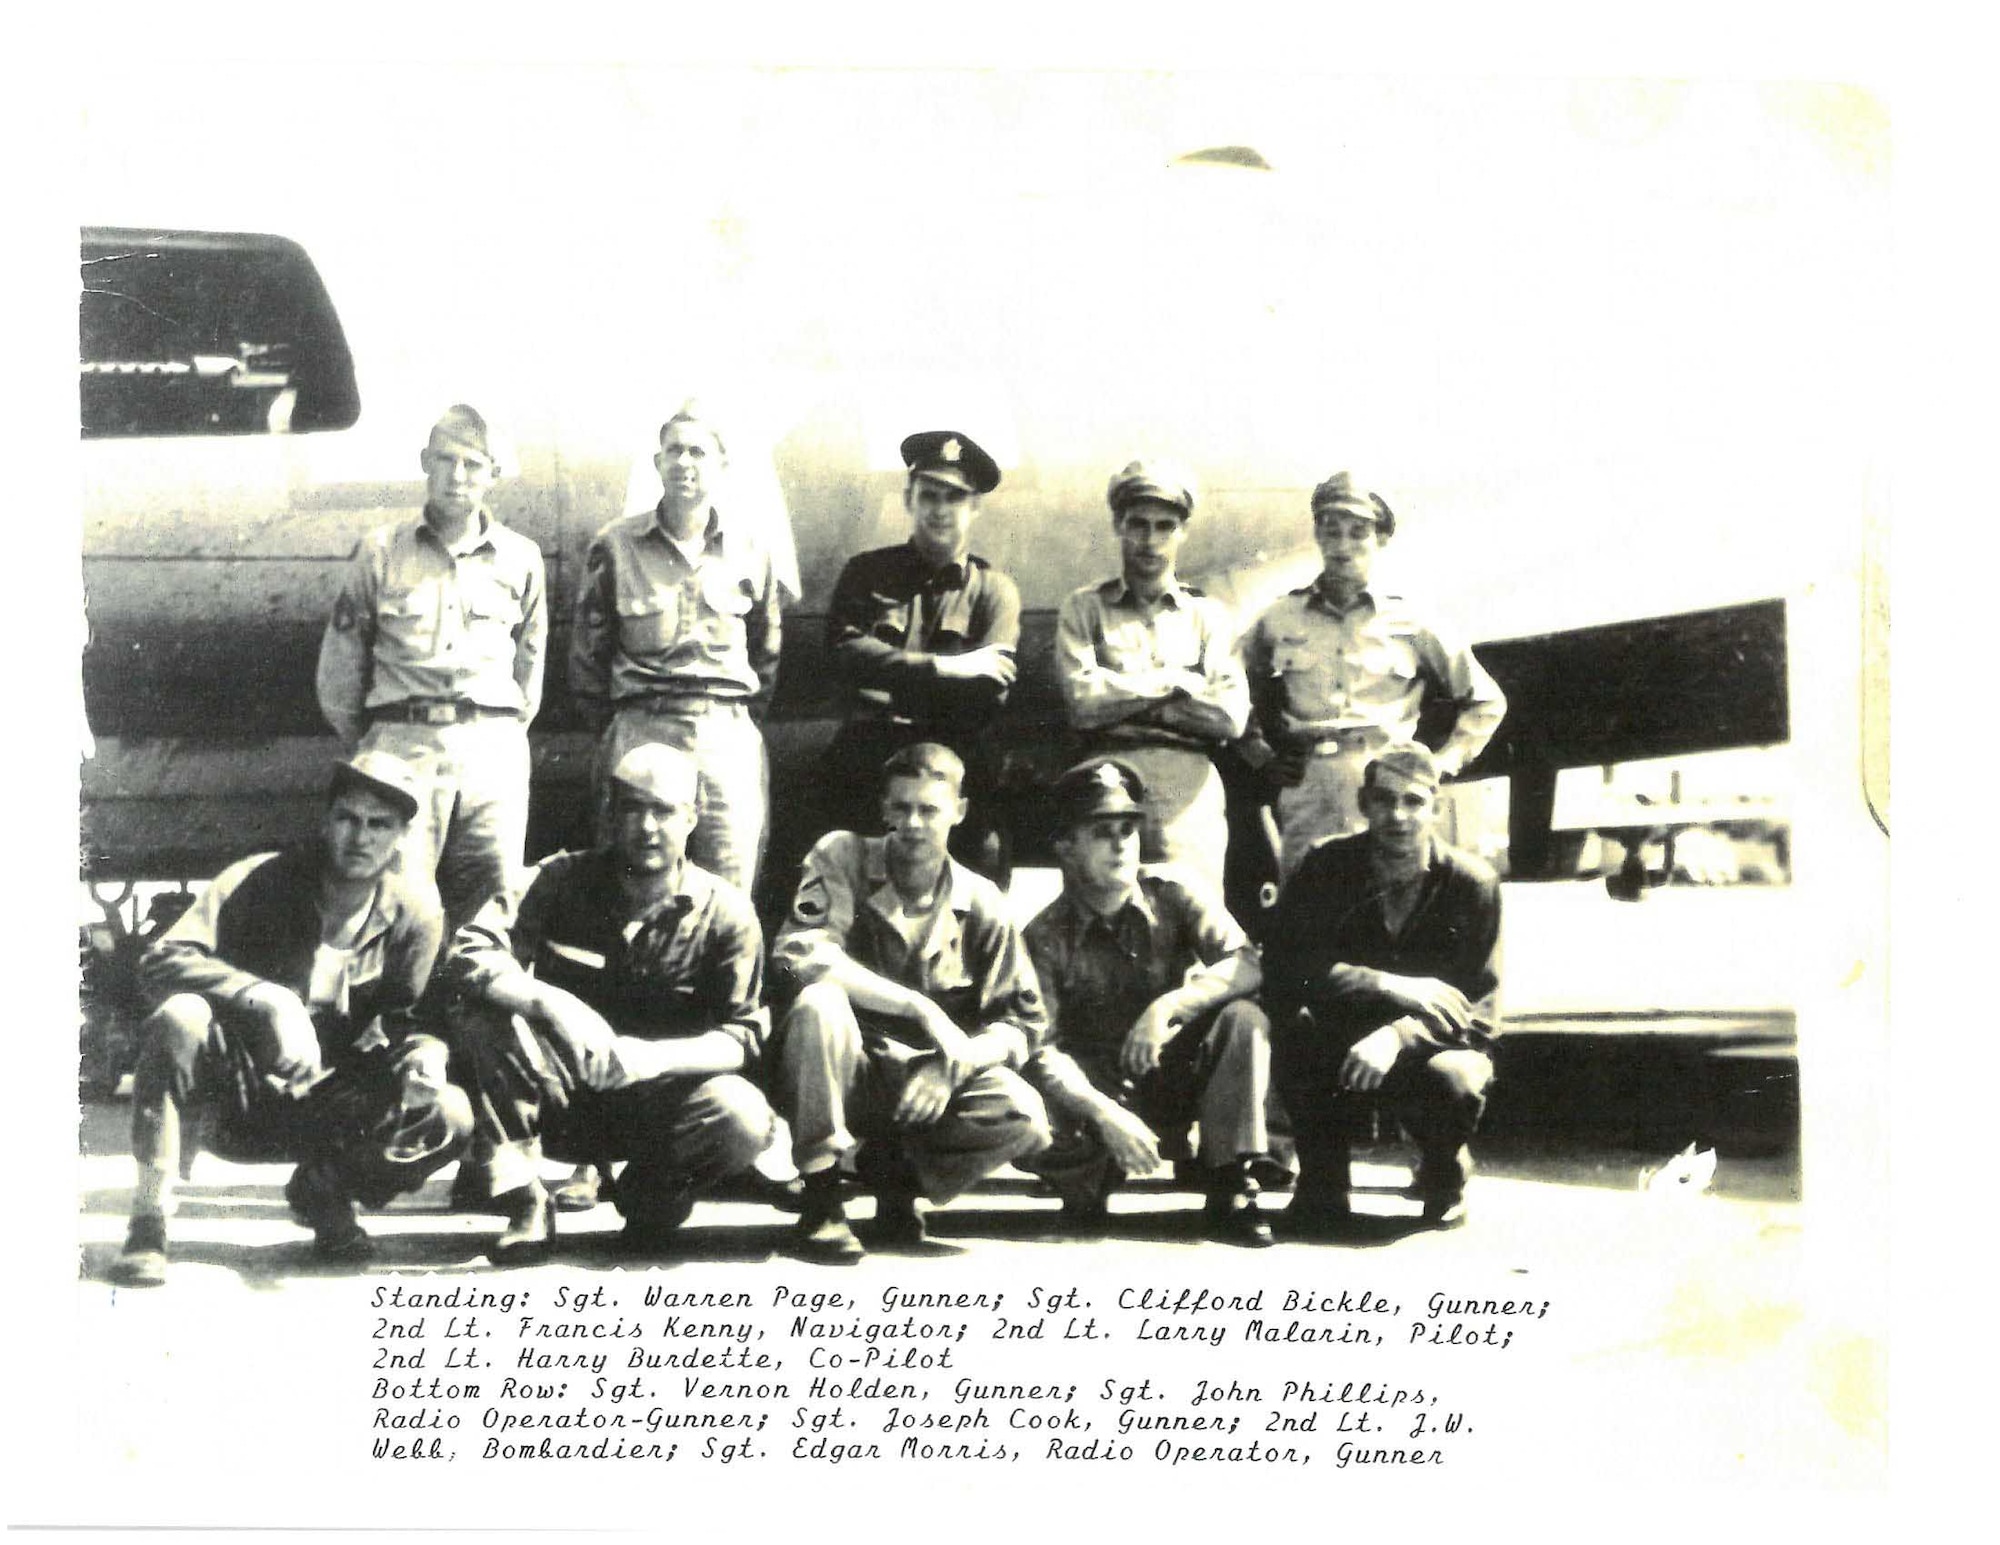 2nd Lt. Harry Burdette(top right), 379th Bombardment B-17 Flying Fortress pilot, shown here with his crew at Kimbolton, England, is the grandfather of Capt. Shawn Jensen, a E-8C Joint Surveillance Target Attack Radar System pilot with the 763rd Expeditionary Reconnaisance Squadron. His grandfatherarrived at Kimbolton in Sept. 1943 and was shot down in late Nov. during a mission over Germany.  He became a prisoner of war for the next 18 months. (Courtesy photo/Richard Burdette/Released)